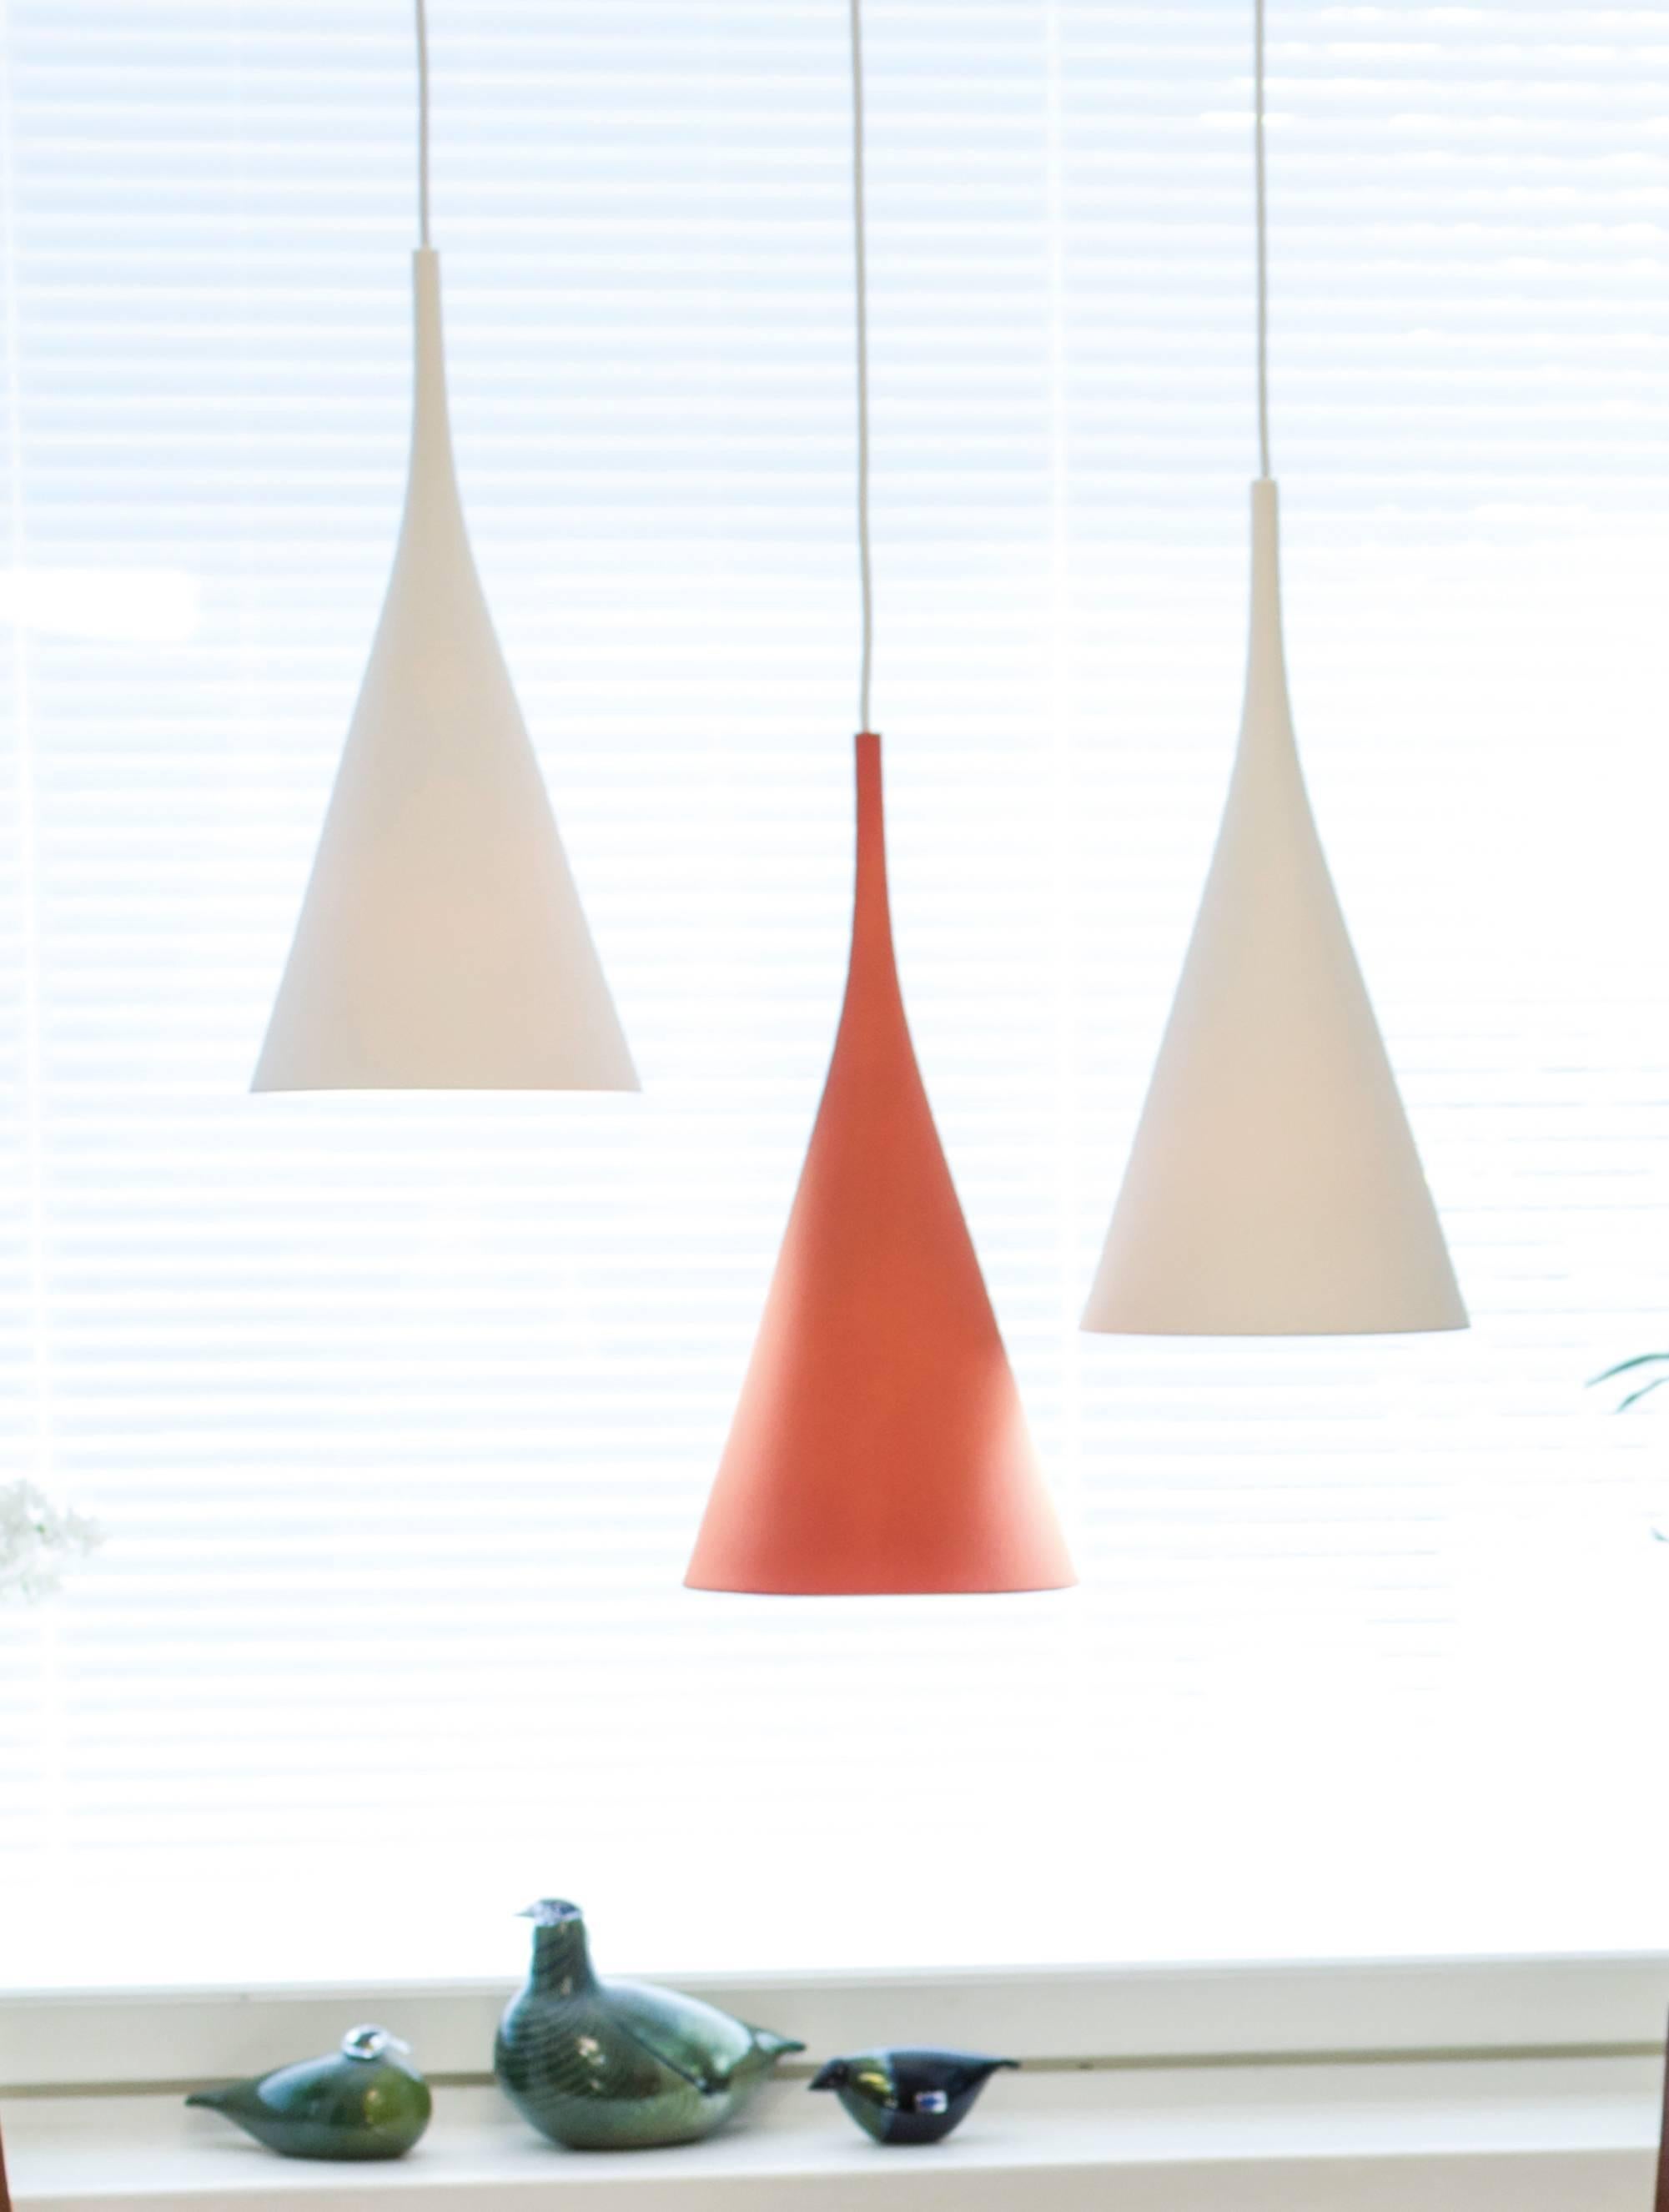 Samuli Naamanka 'Lambada' ceramic pendants in red for Innolux. 

Designed by the internationally renowned Naamanka in 2013 and manufactured in Finland through artful hand casting. The minimal and refined shape and a smooth matte ceramic surface